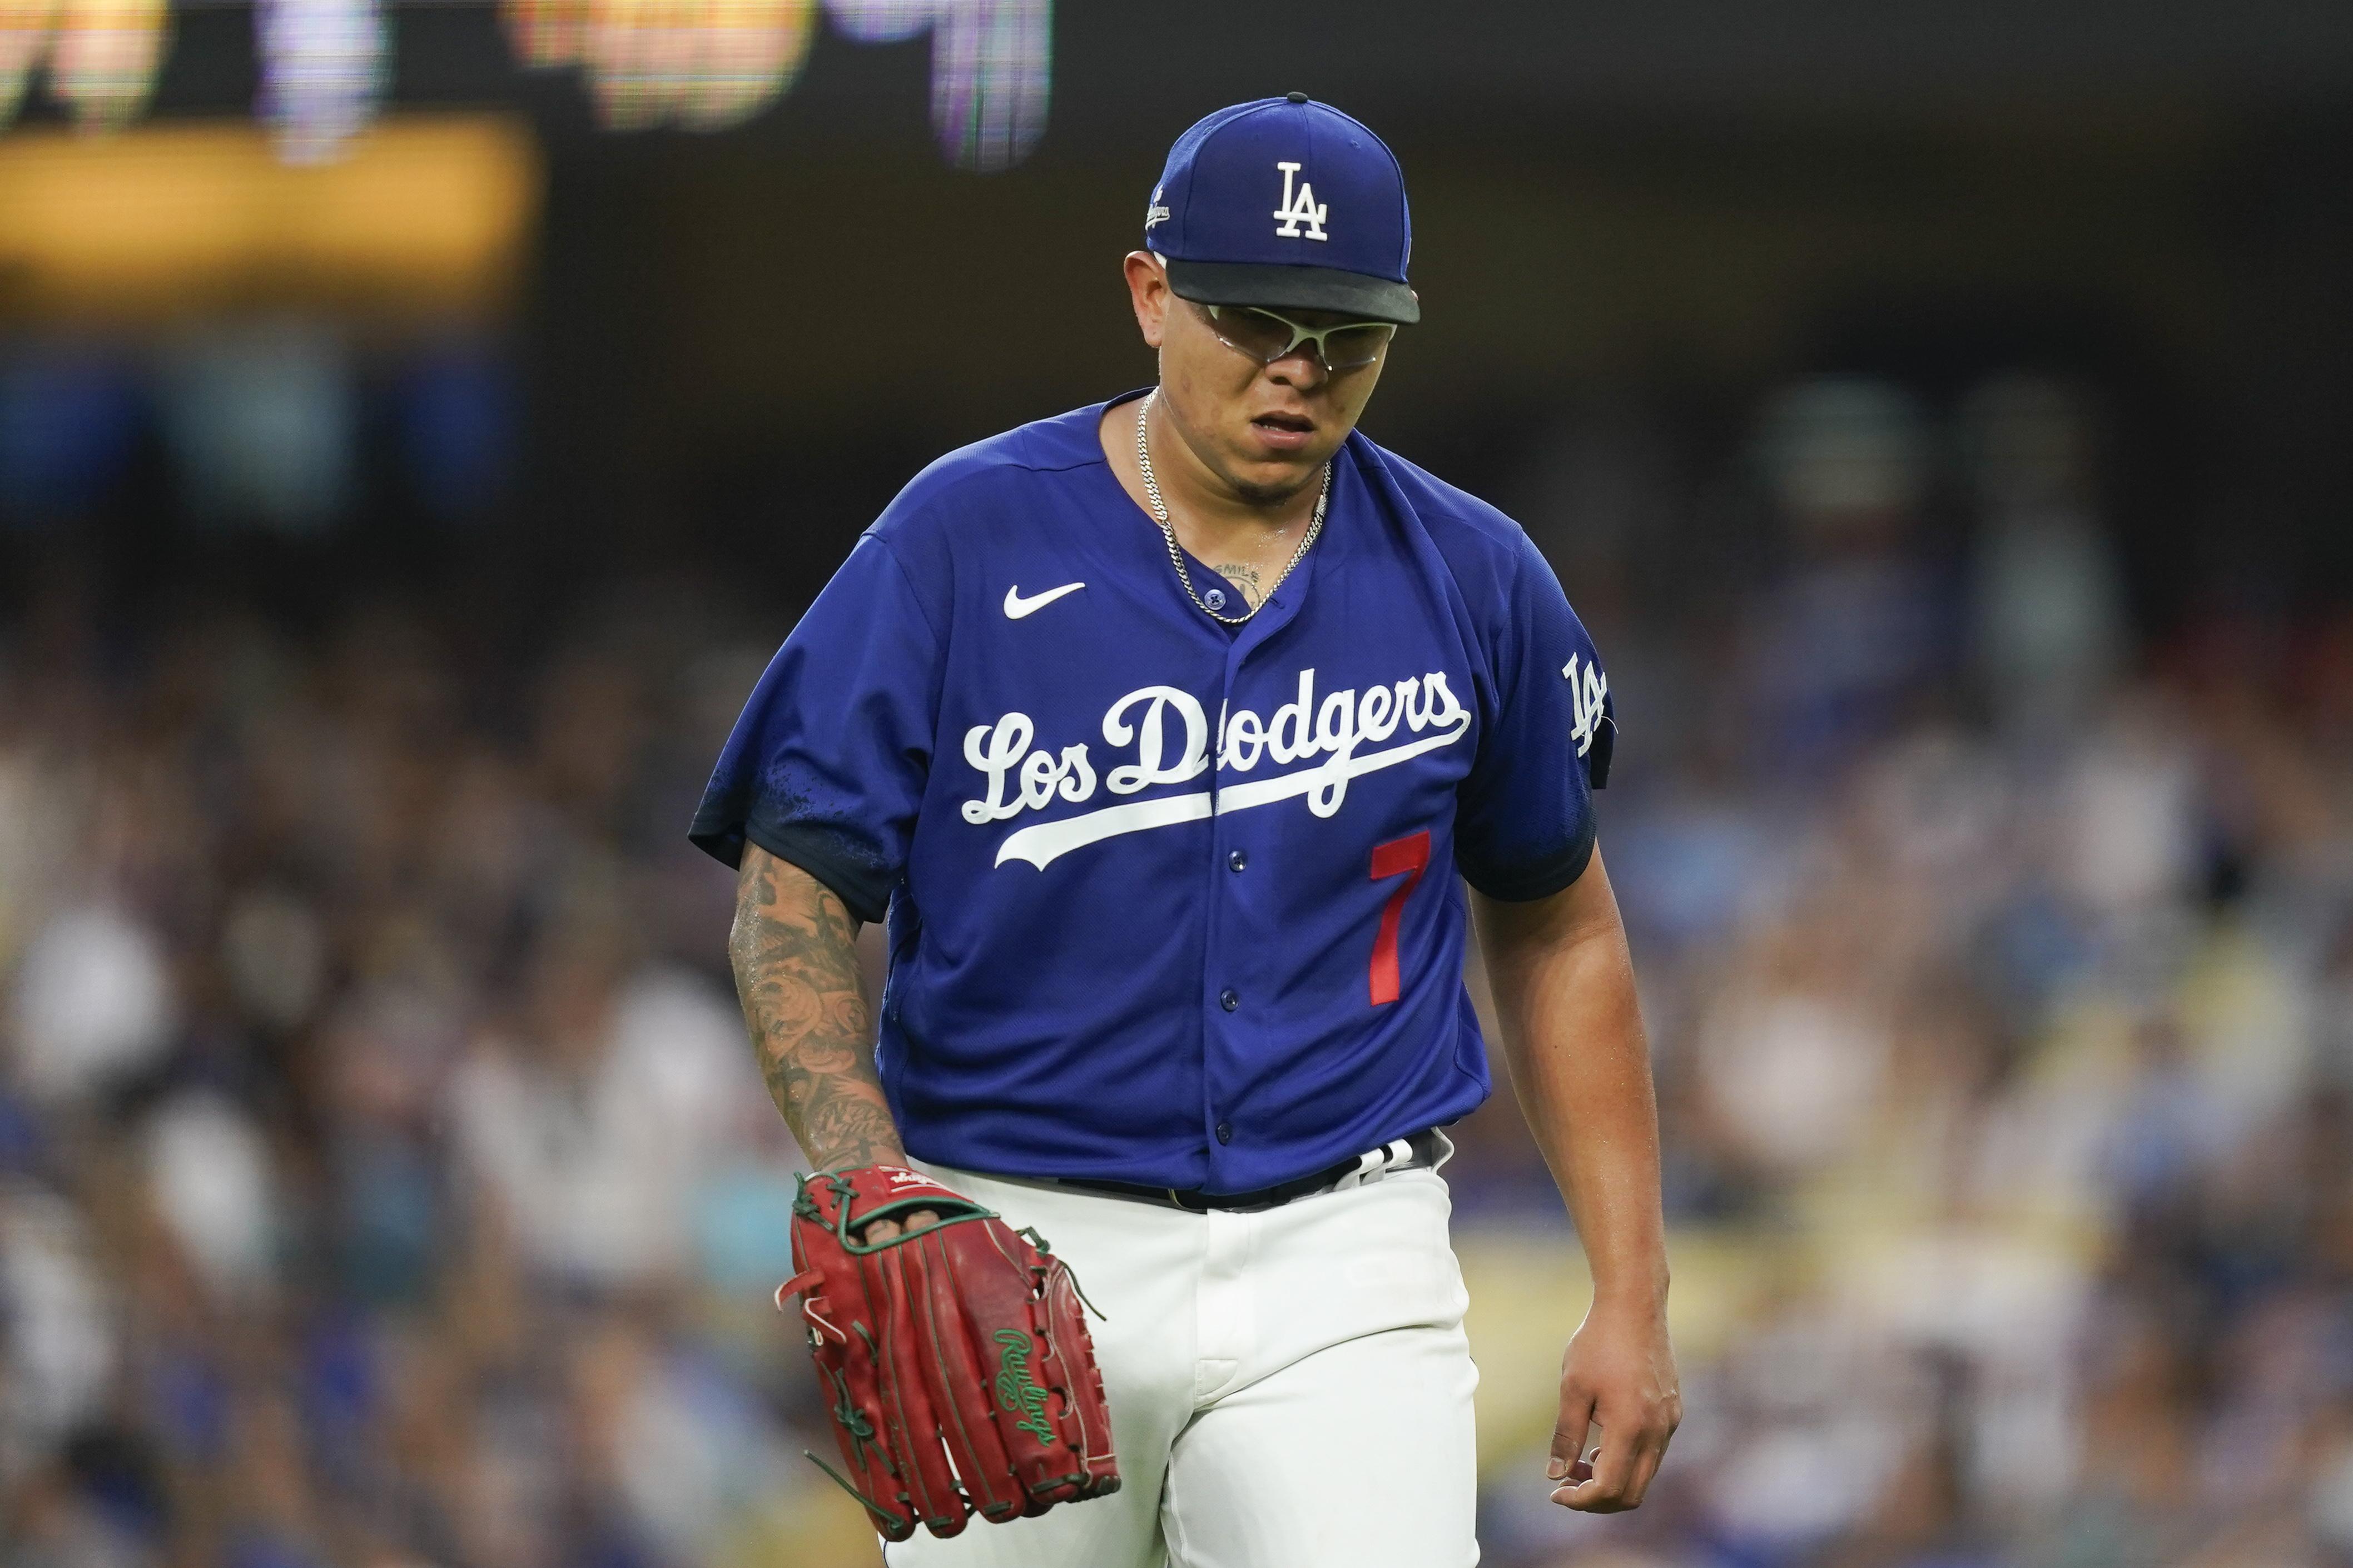 Julio Urias Becomes 6th Pitcher In Dodgers Franchise History To Be